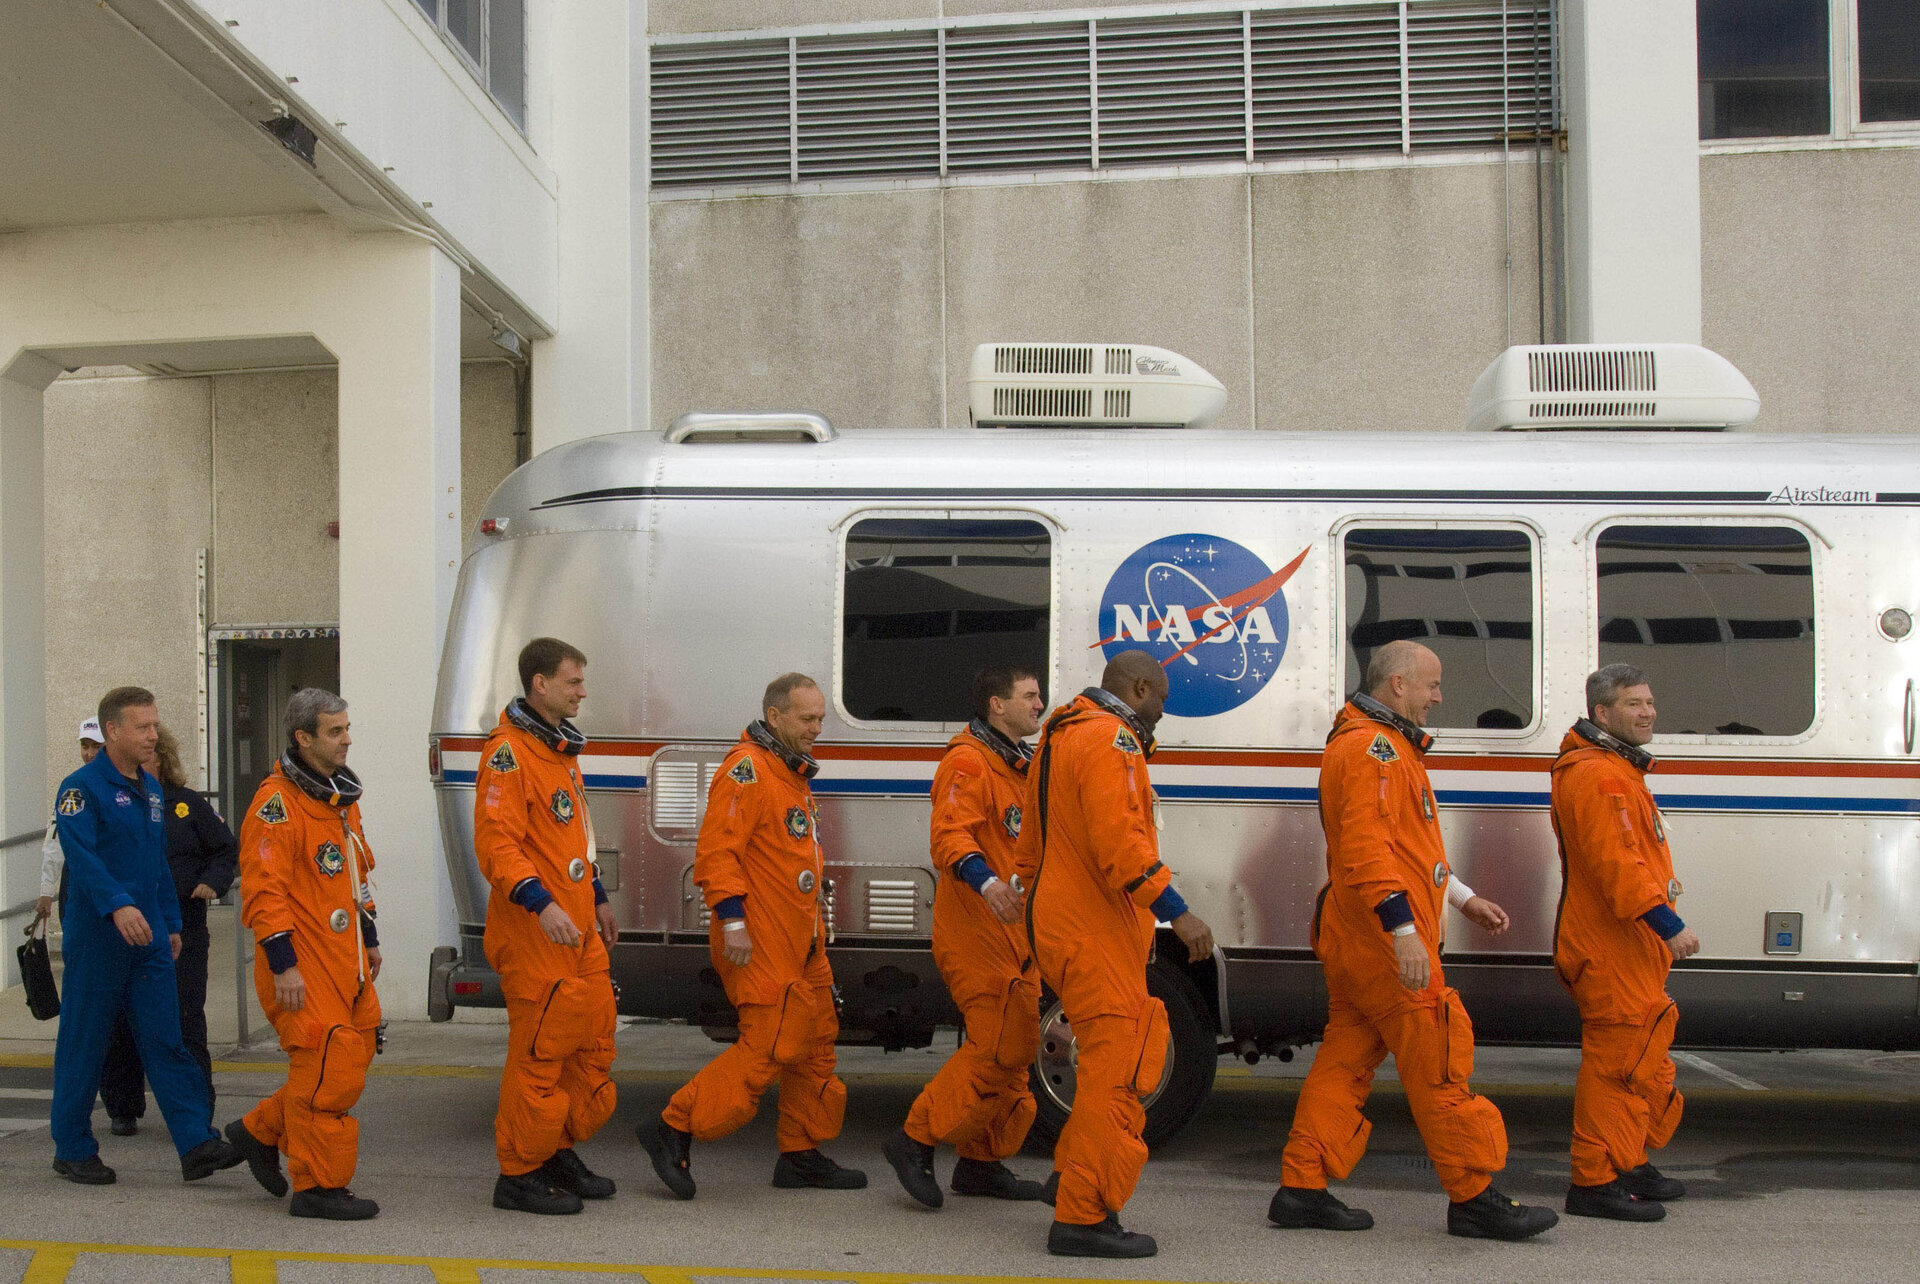 STS-122 mission crew during walk out